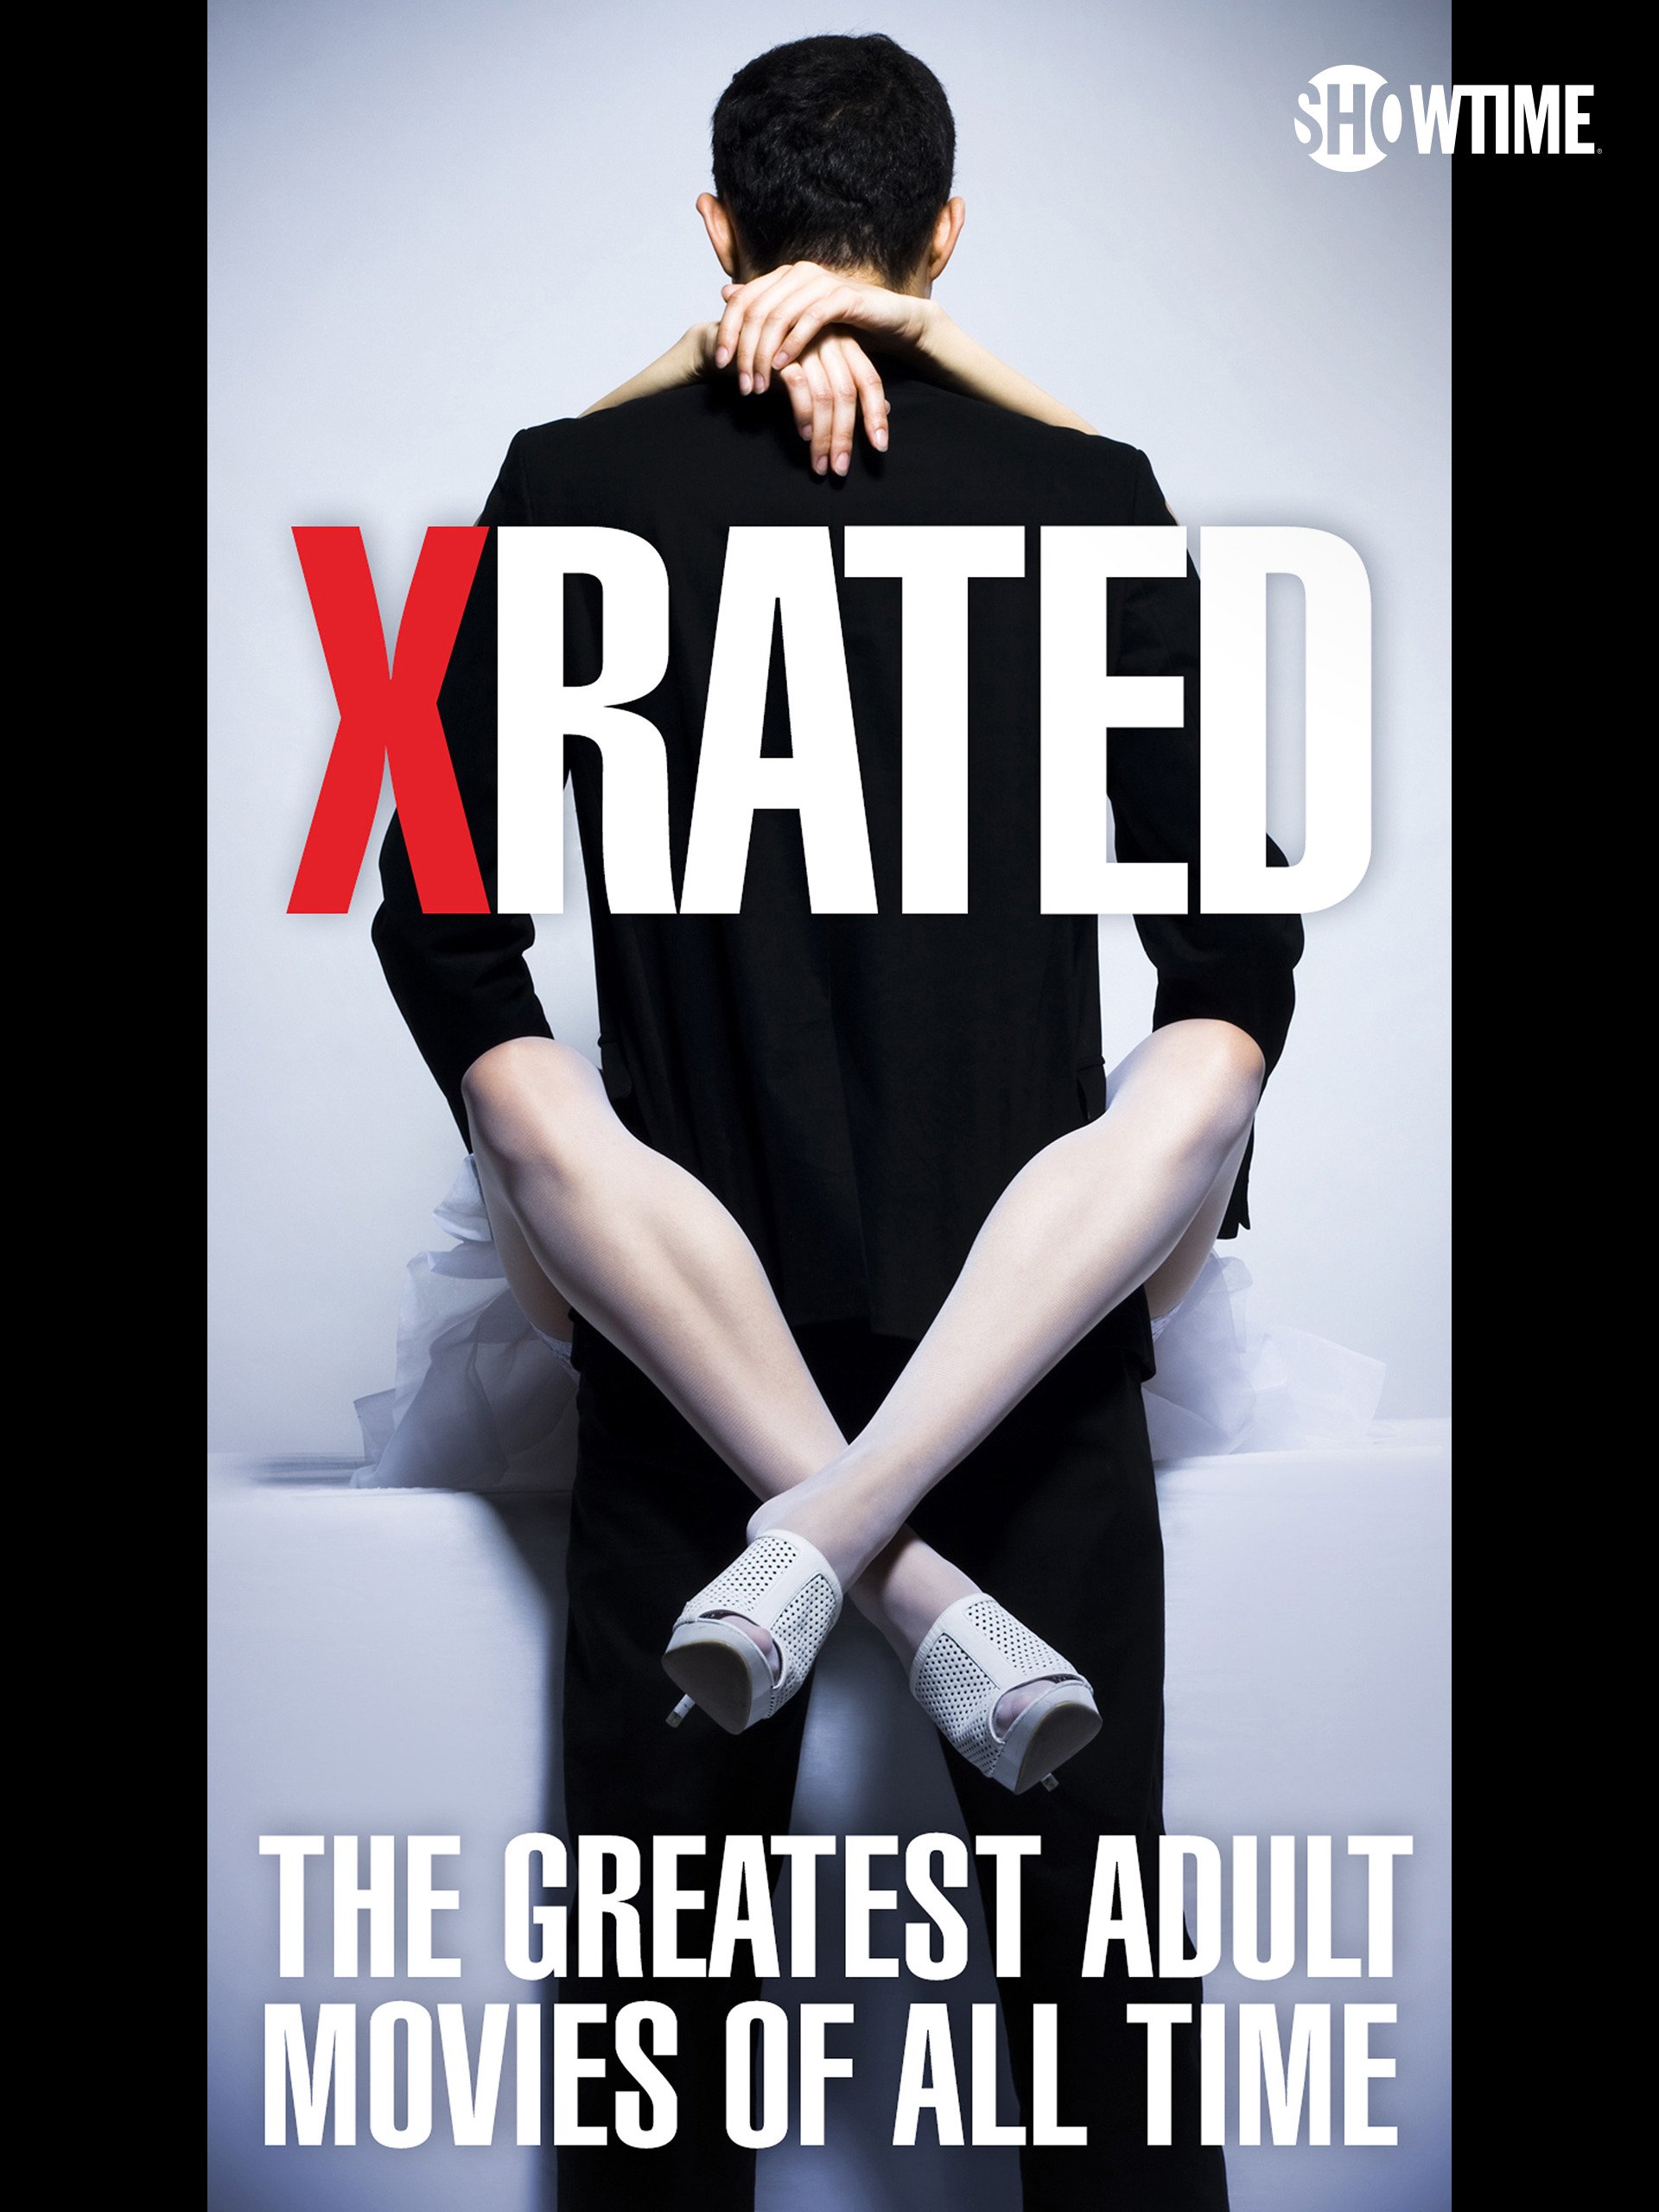 X-Rated: The Greatest Adult Movies of All Time (TV Movie 2015) - IMDb